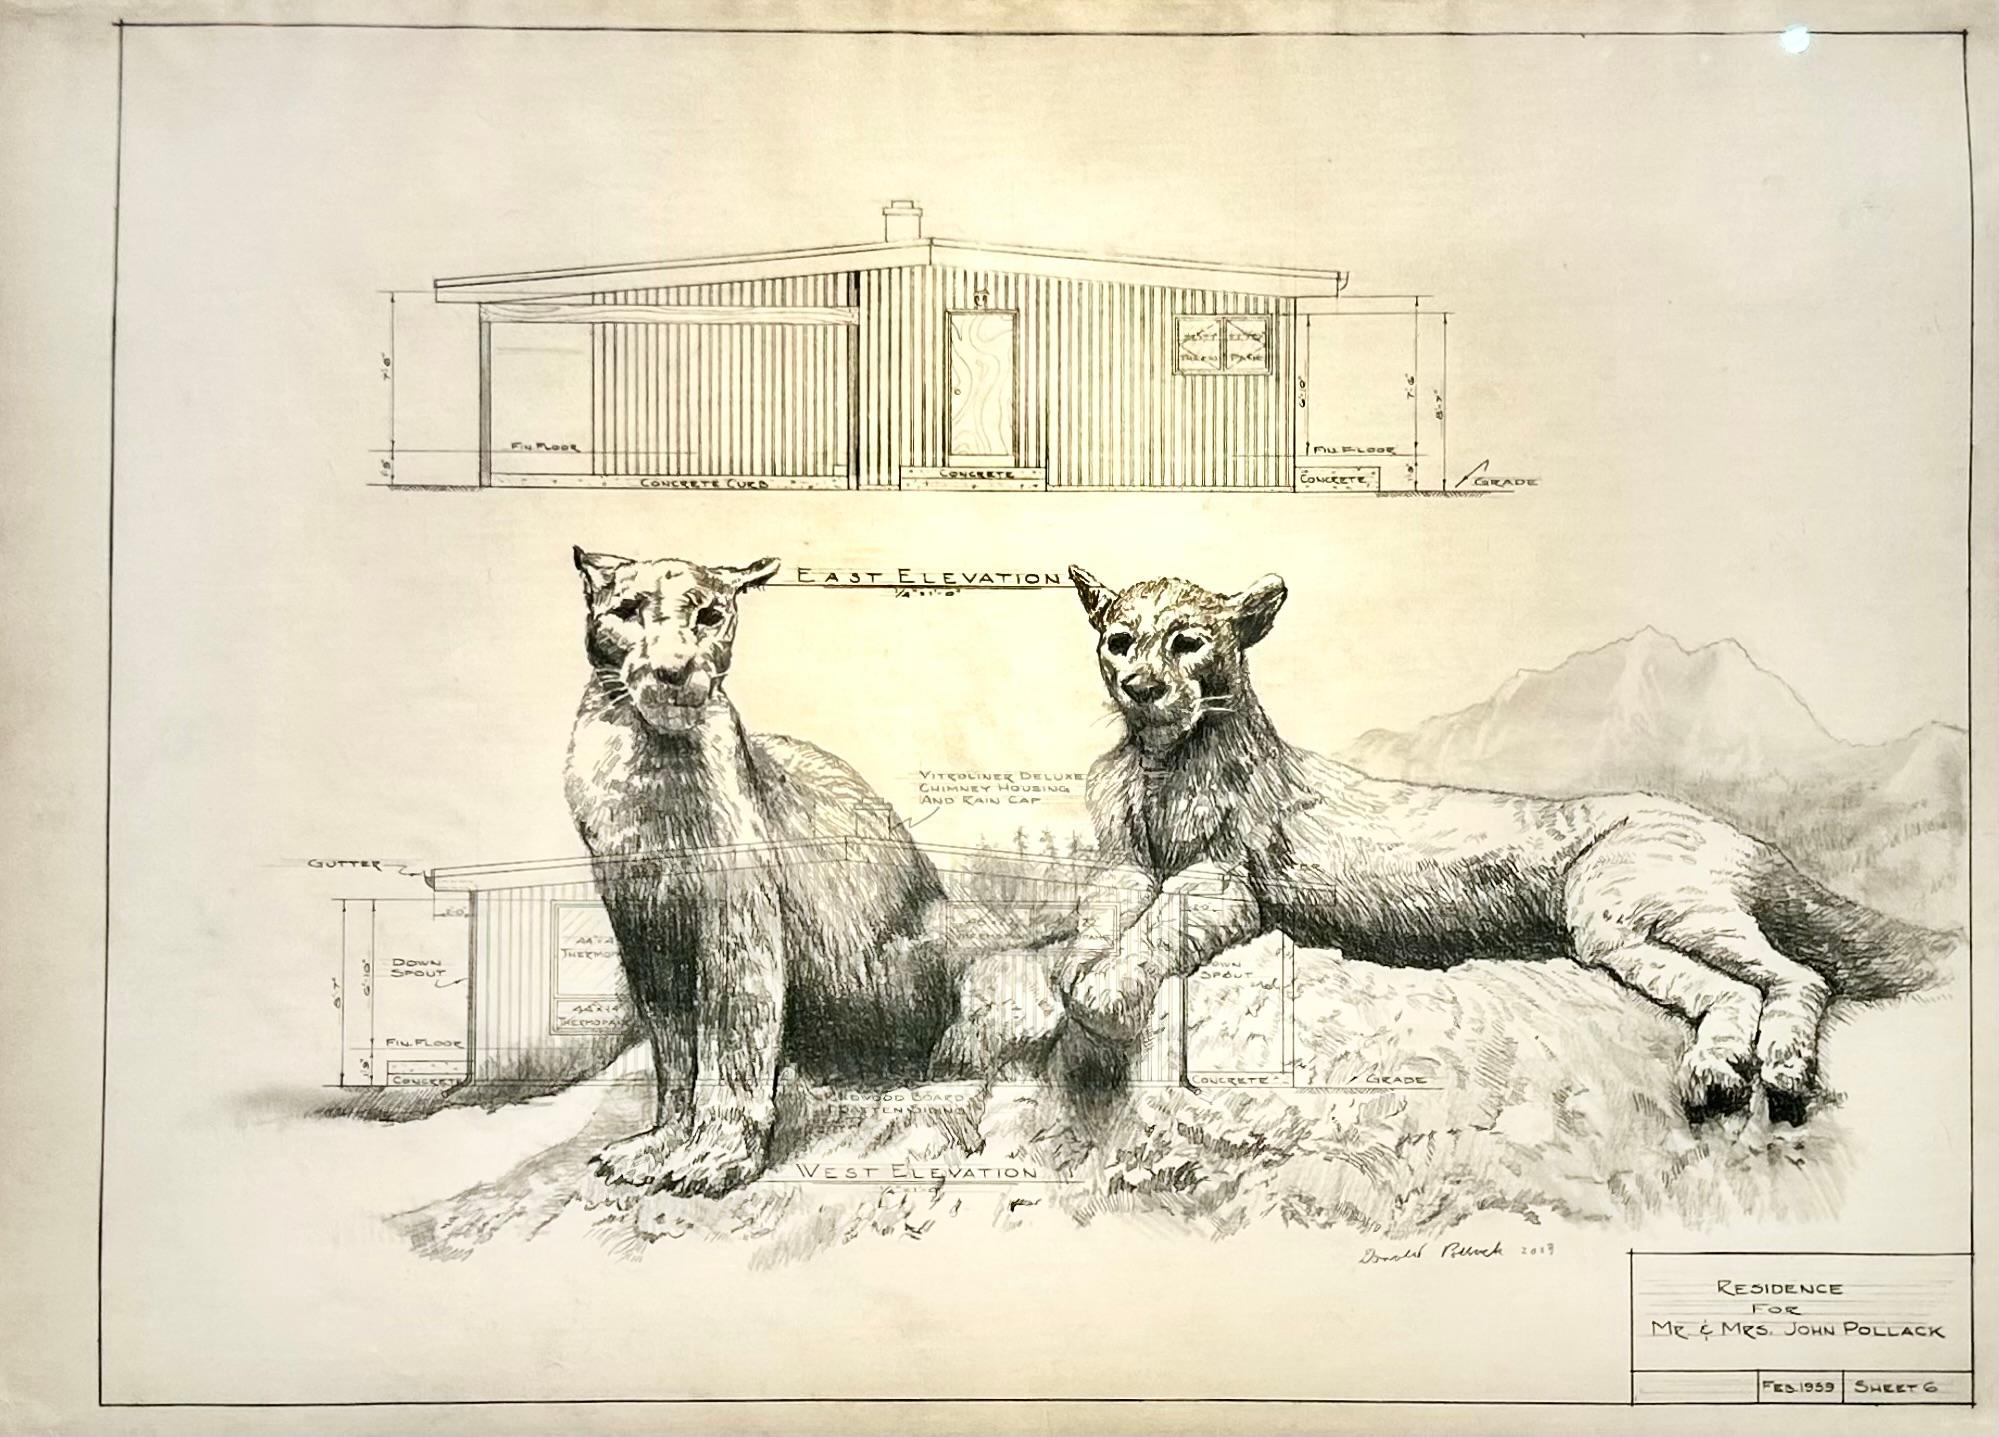 Don Pollack Landscape Art - Sentinel - Mountain Lions in Graphite on Antique Architectural Drawings 